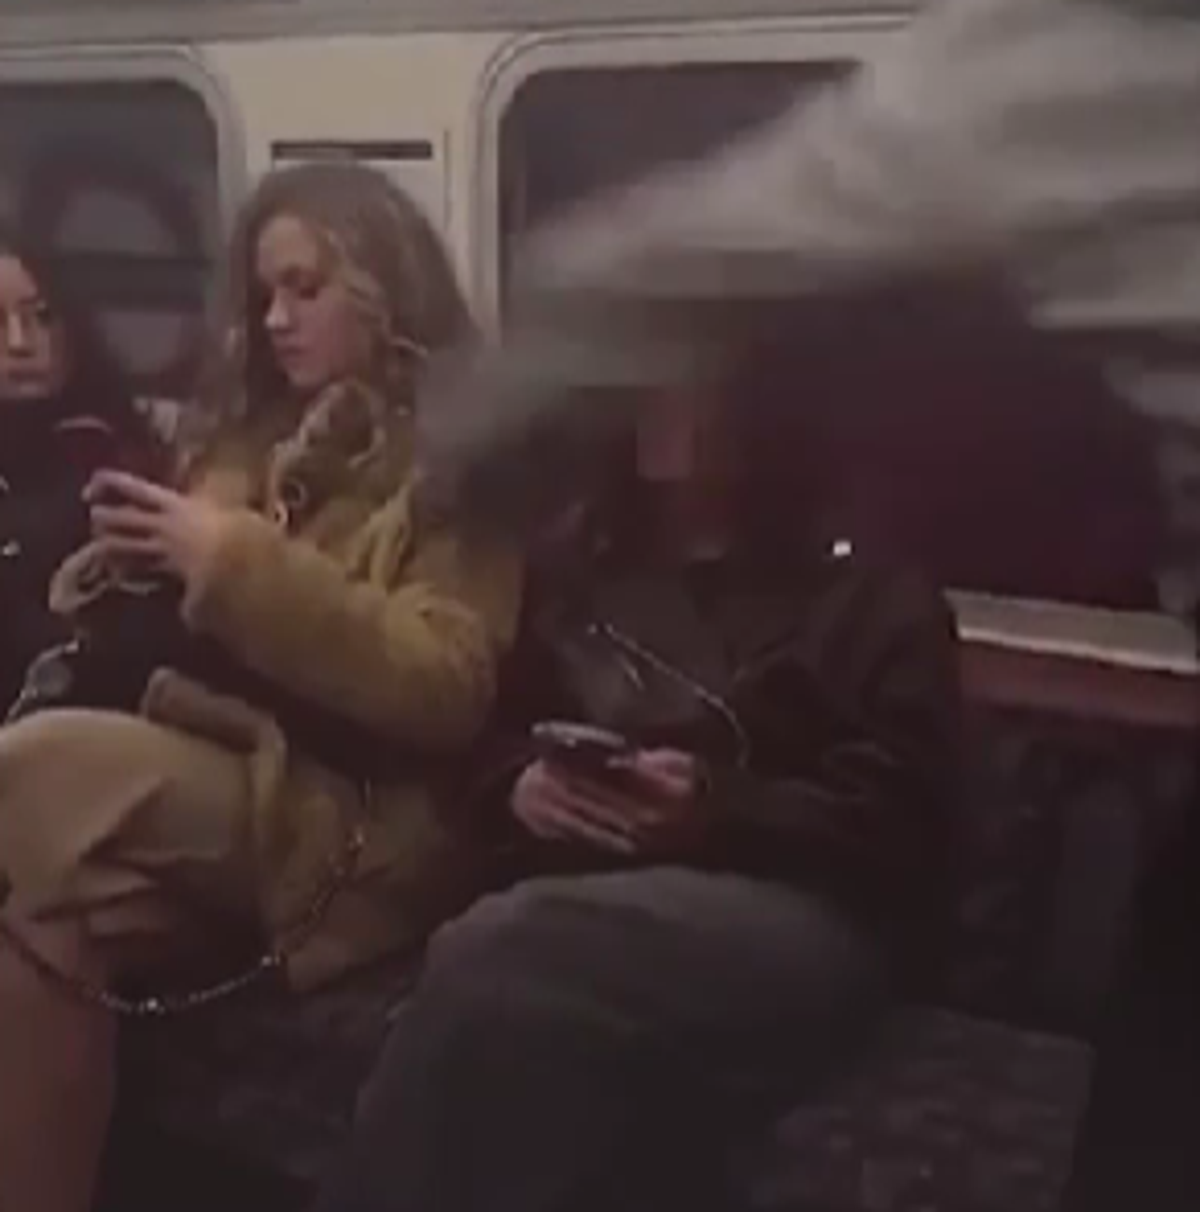 Police appeal after video shows woman 'looking for online clout' randomly punching Tube passenger